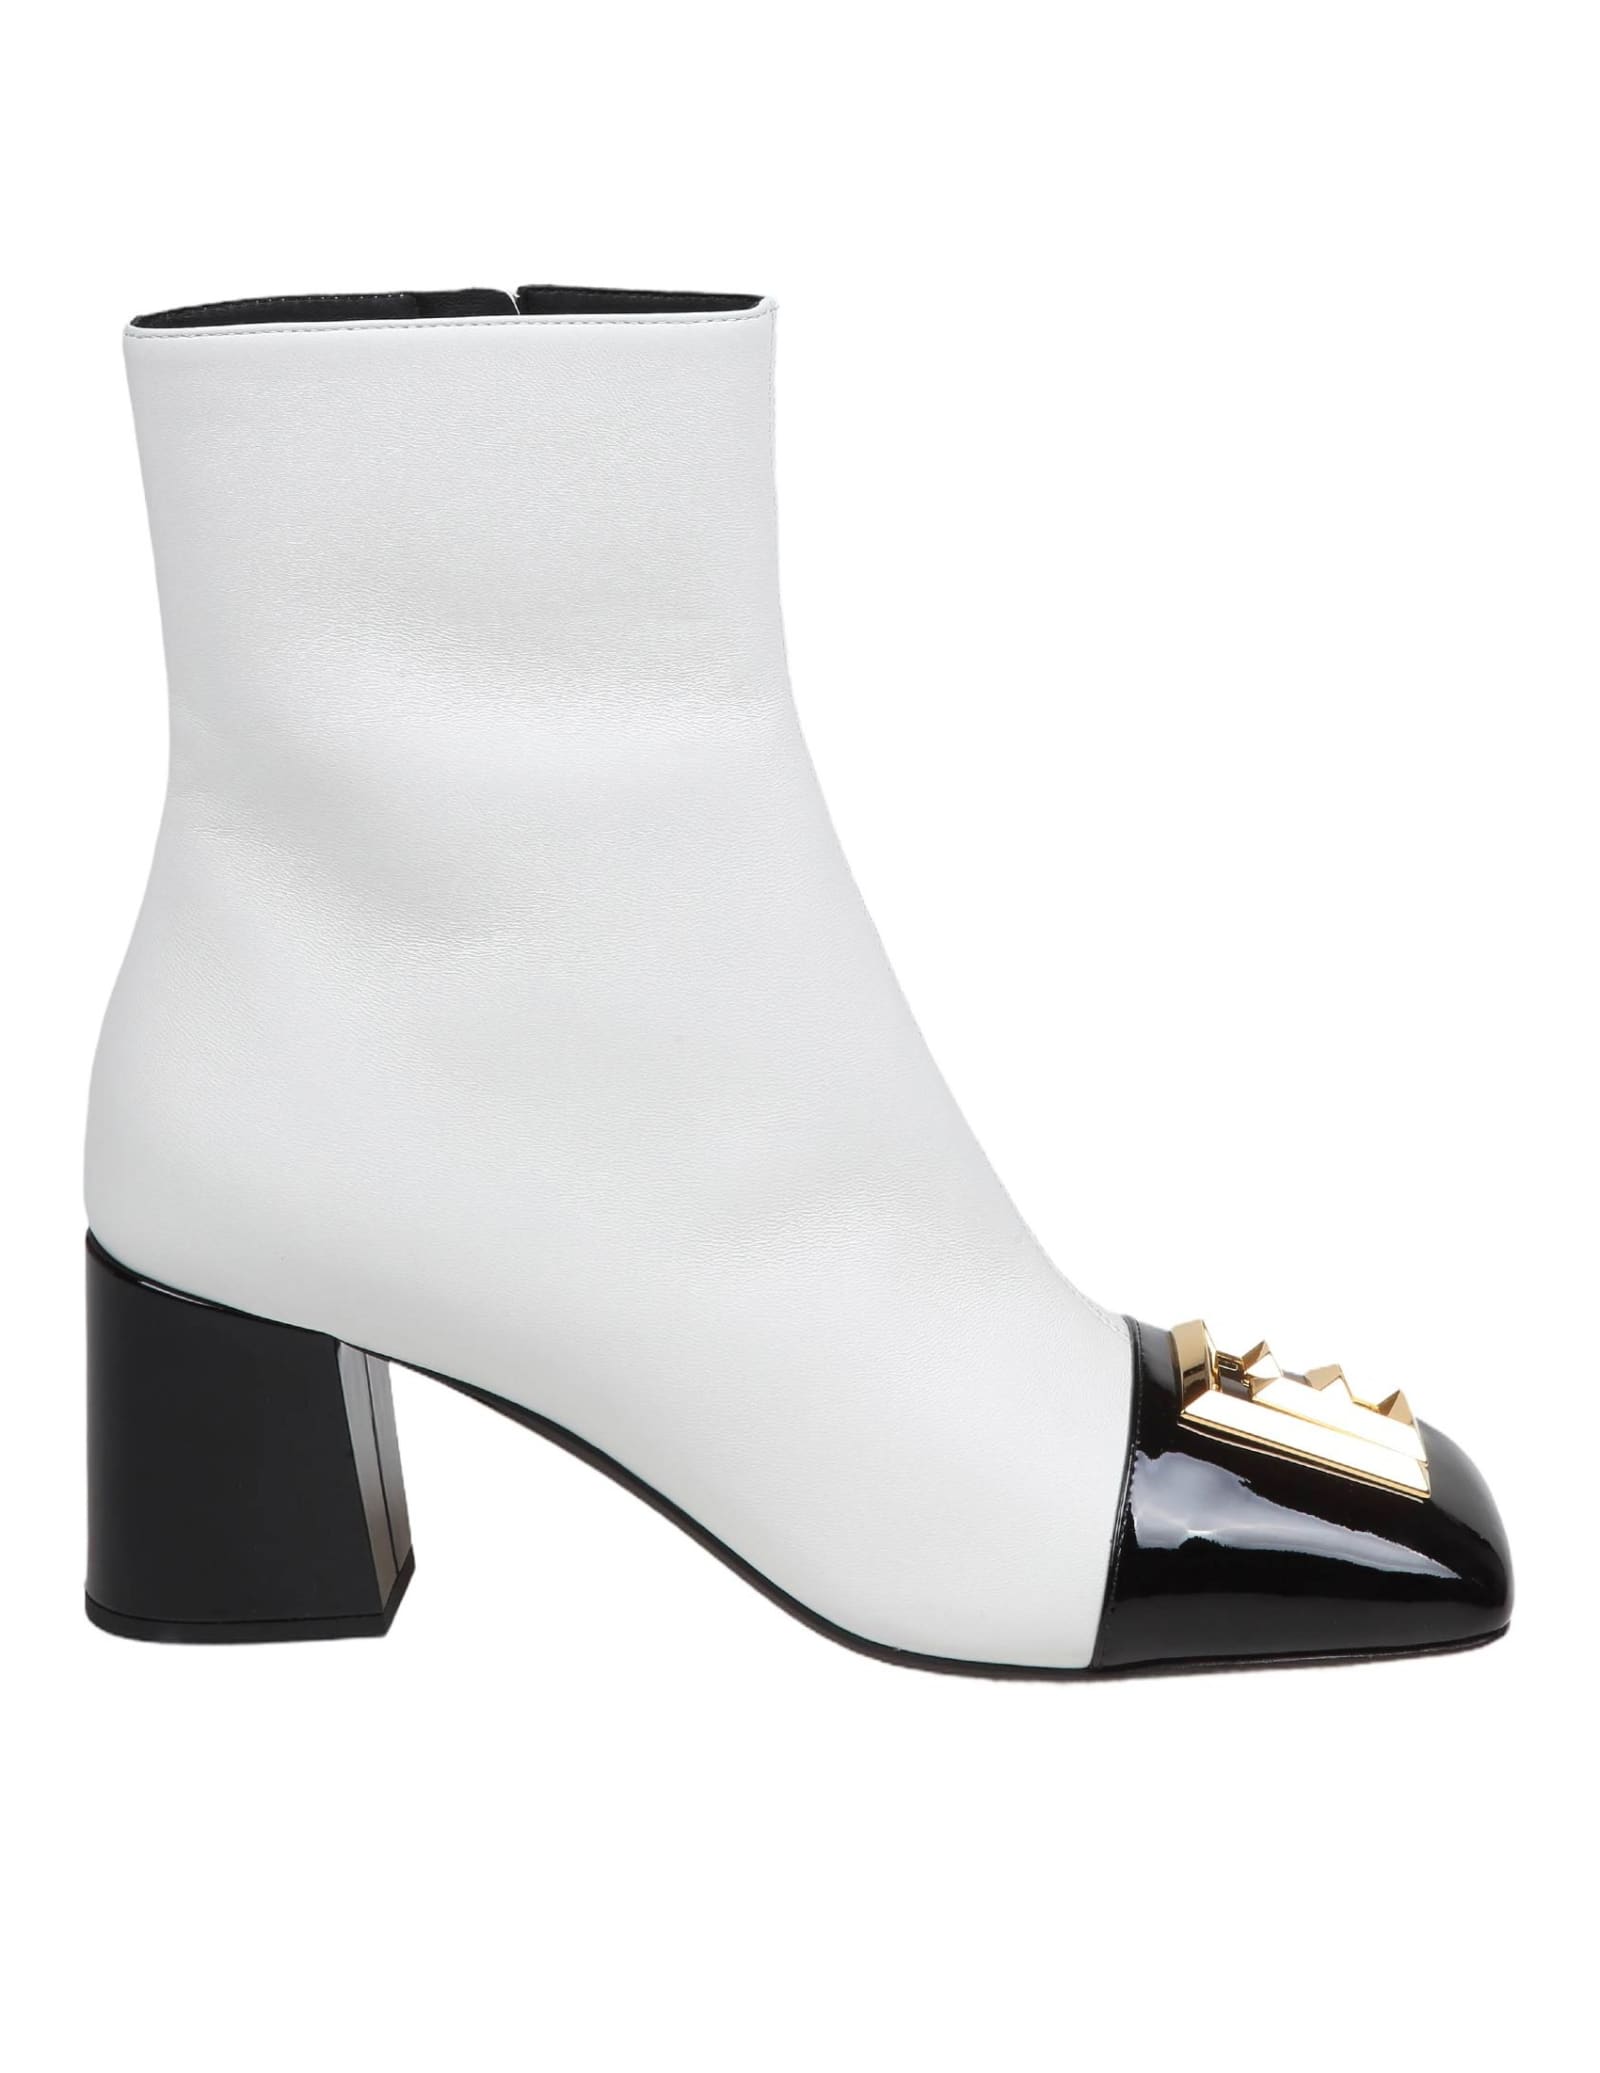 Edna Ankle Boot In Black And White Leather